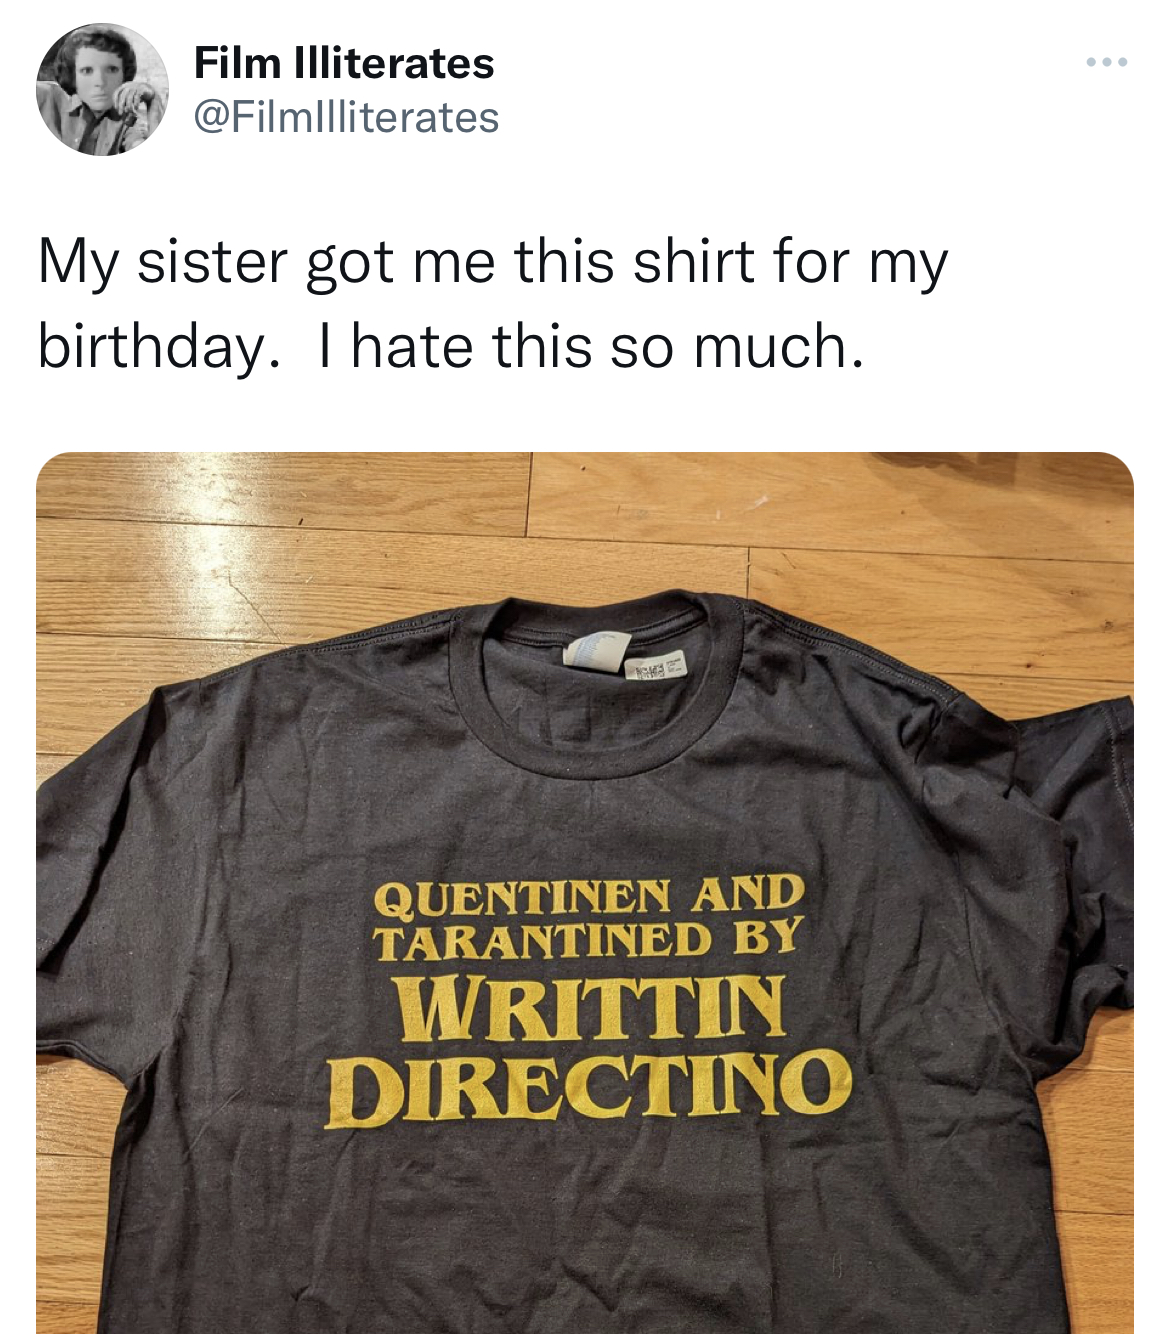 savage and absurd tweets - t shirt - Film Illiterates My sister got me this shirt for my I hate this so much. birthday. Quentinen And Tarantined By Writtin Directino